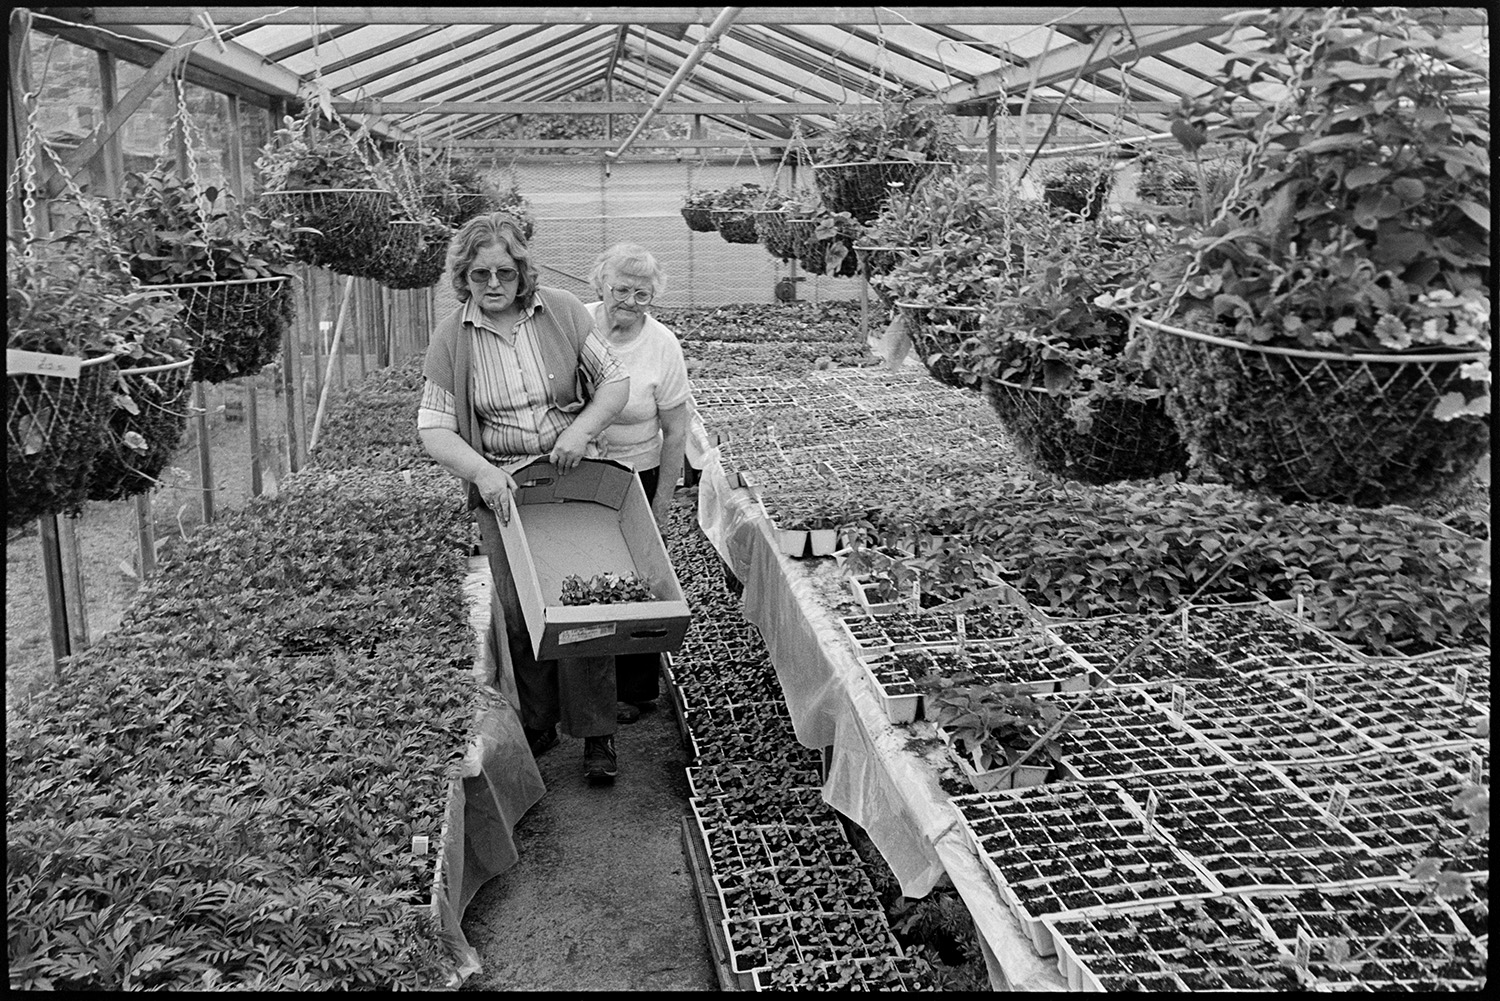 Women choosing plants in garden centre.
[Two women choosing from plants, seedlings and hanging baskets in a greenhouse at Eggesford Garden Centre.]